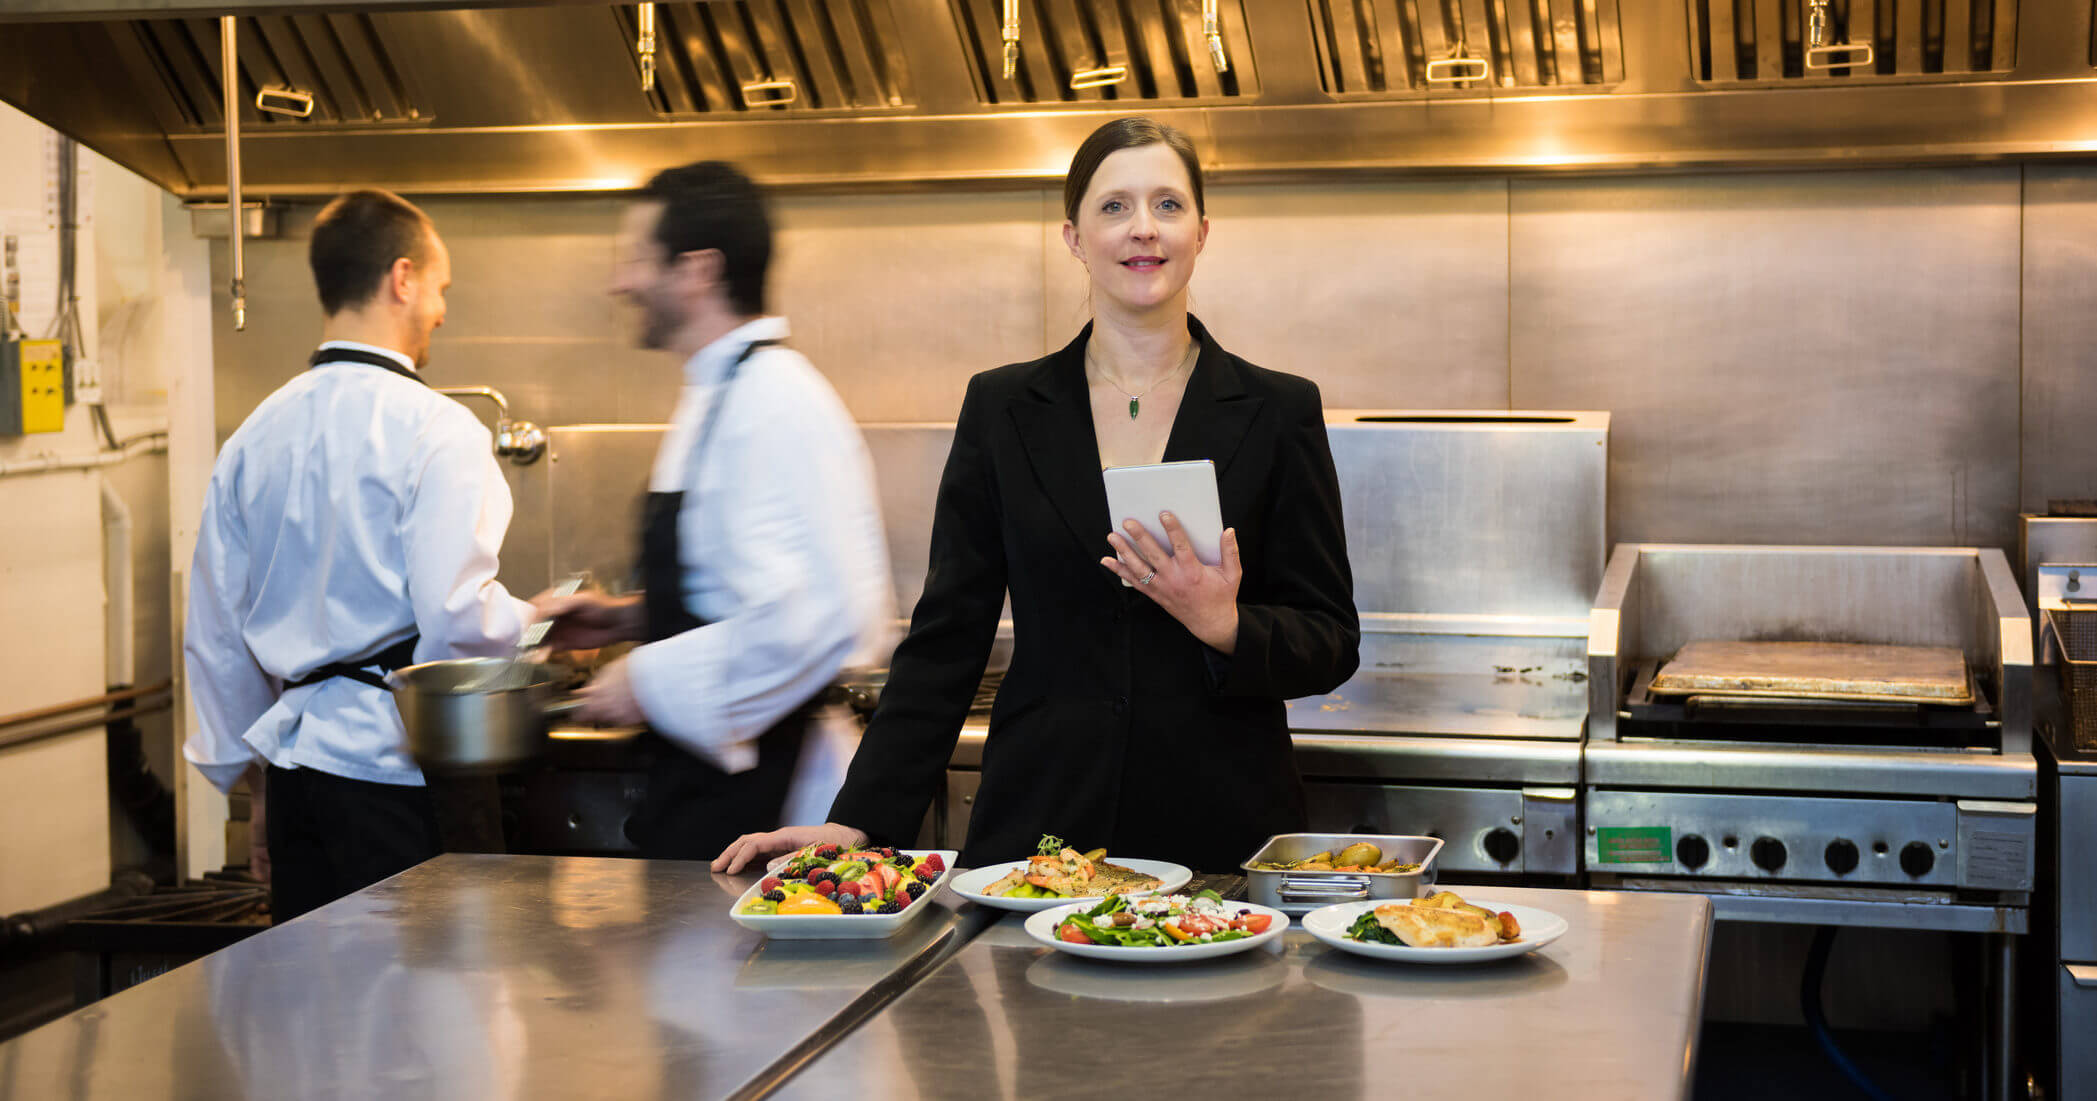 Optimize Your Restaurant: Reduce Employee Turnover, Retain Skilled Staff and Reduce Your Food and Labor Costs